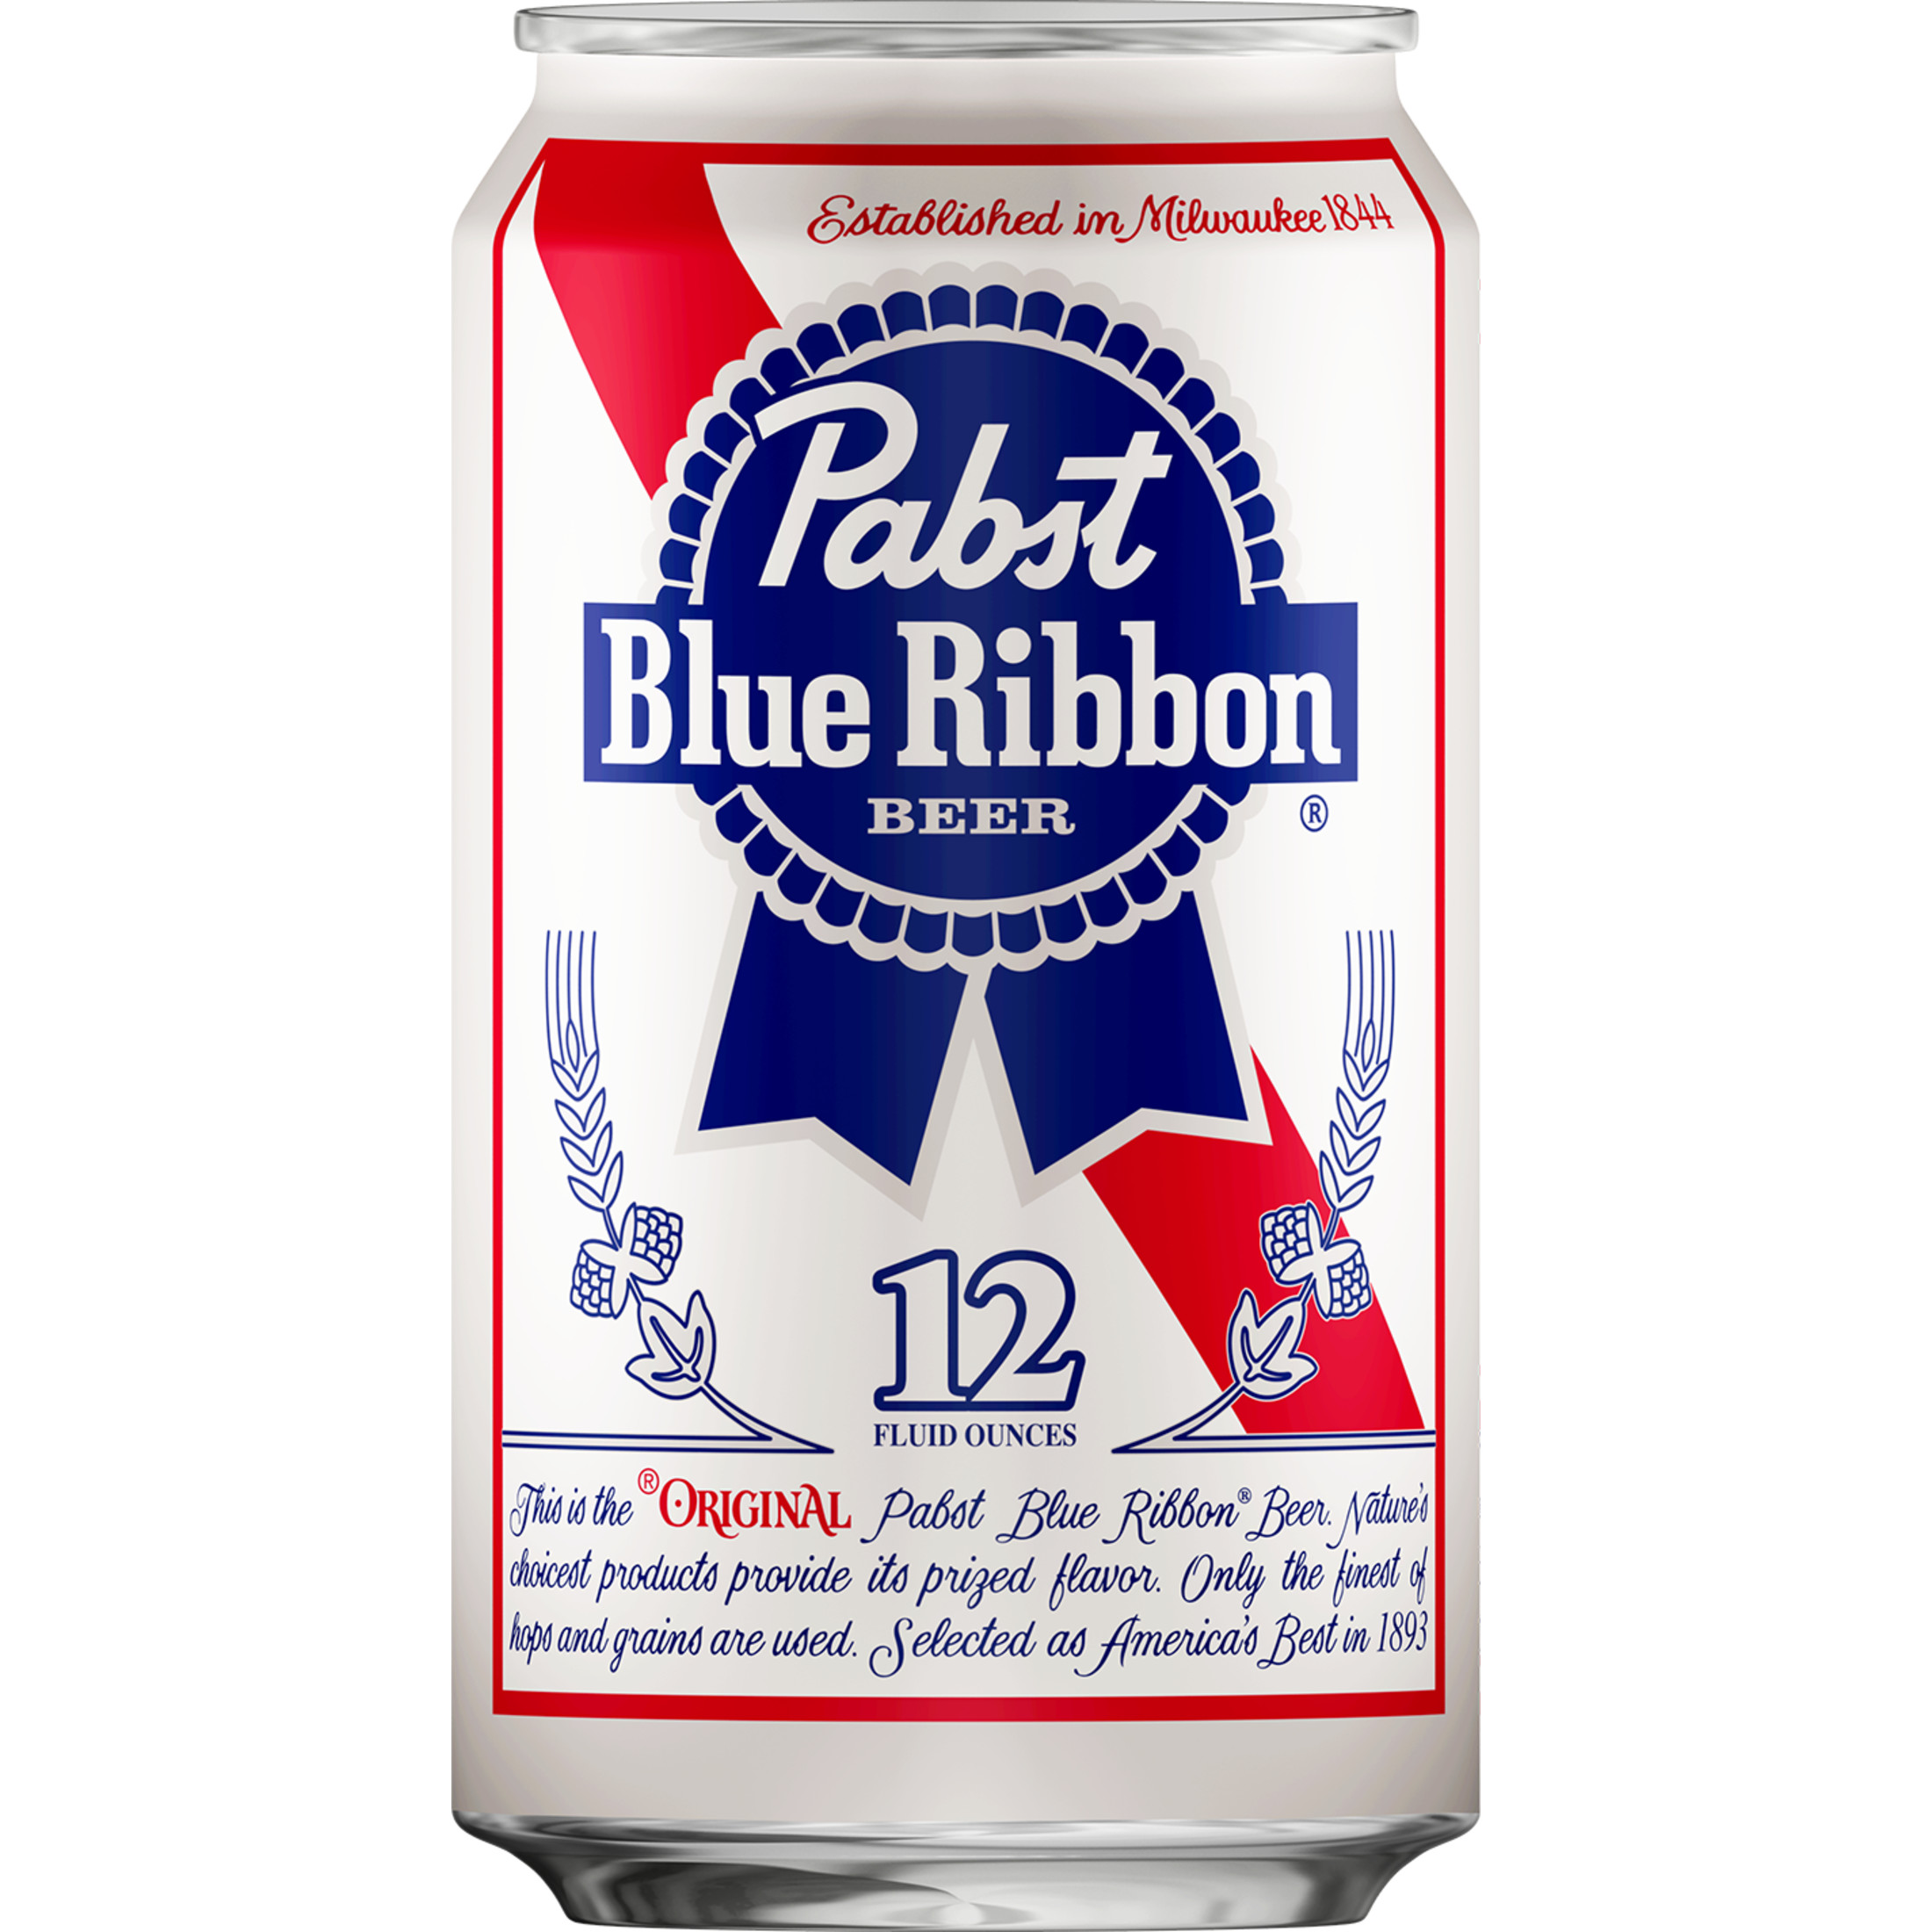 Pabst Blue Ribbon, Domestic Lager, 12 Pack, 12 fl oz Can, 3.9% ABV - image 3 of 12